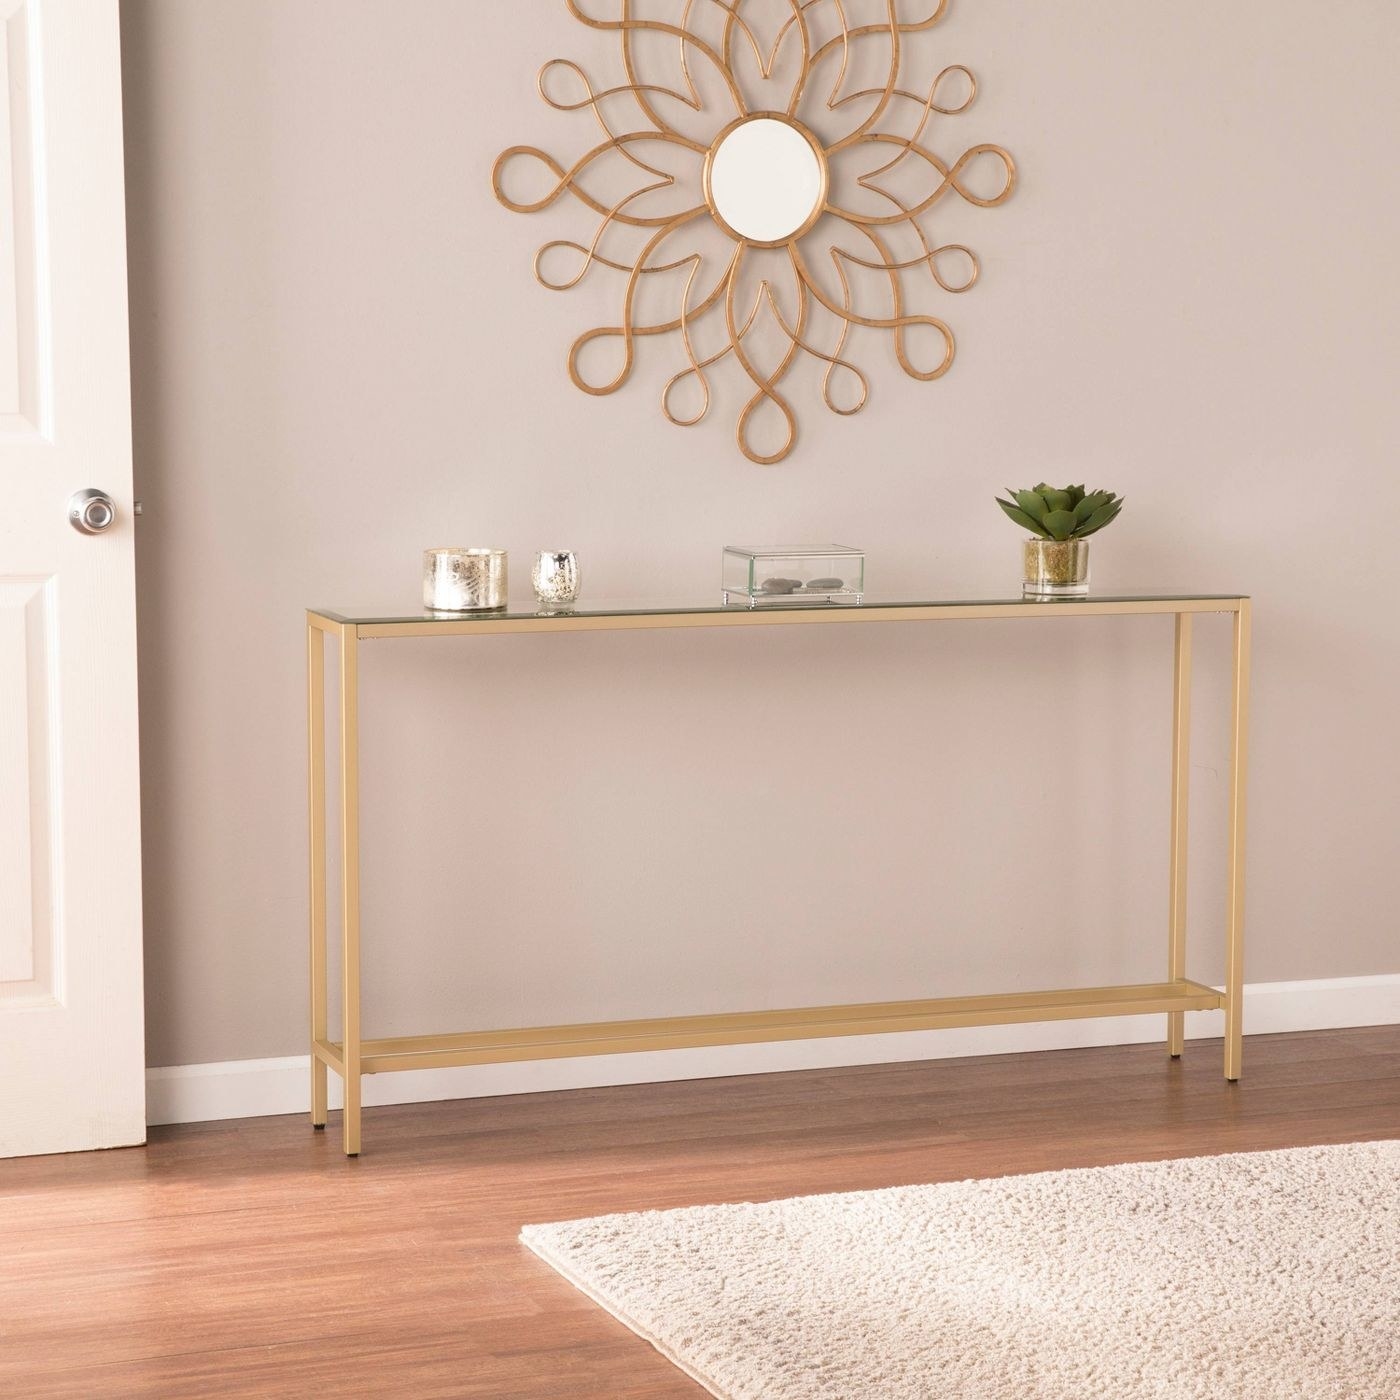 the mirror-topped, gold legged table in an entryway